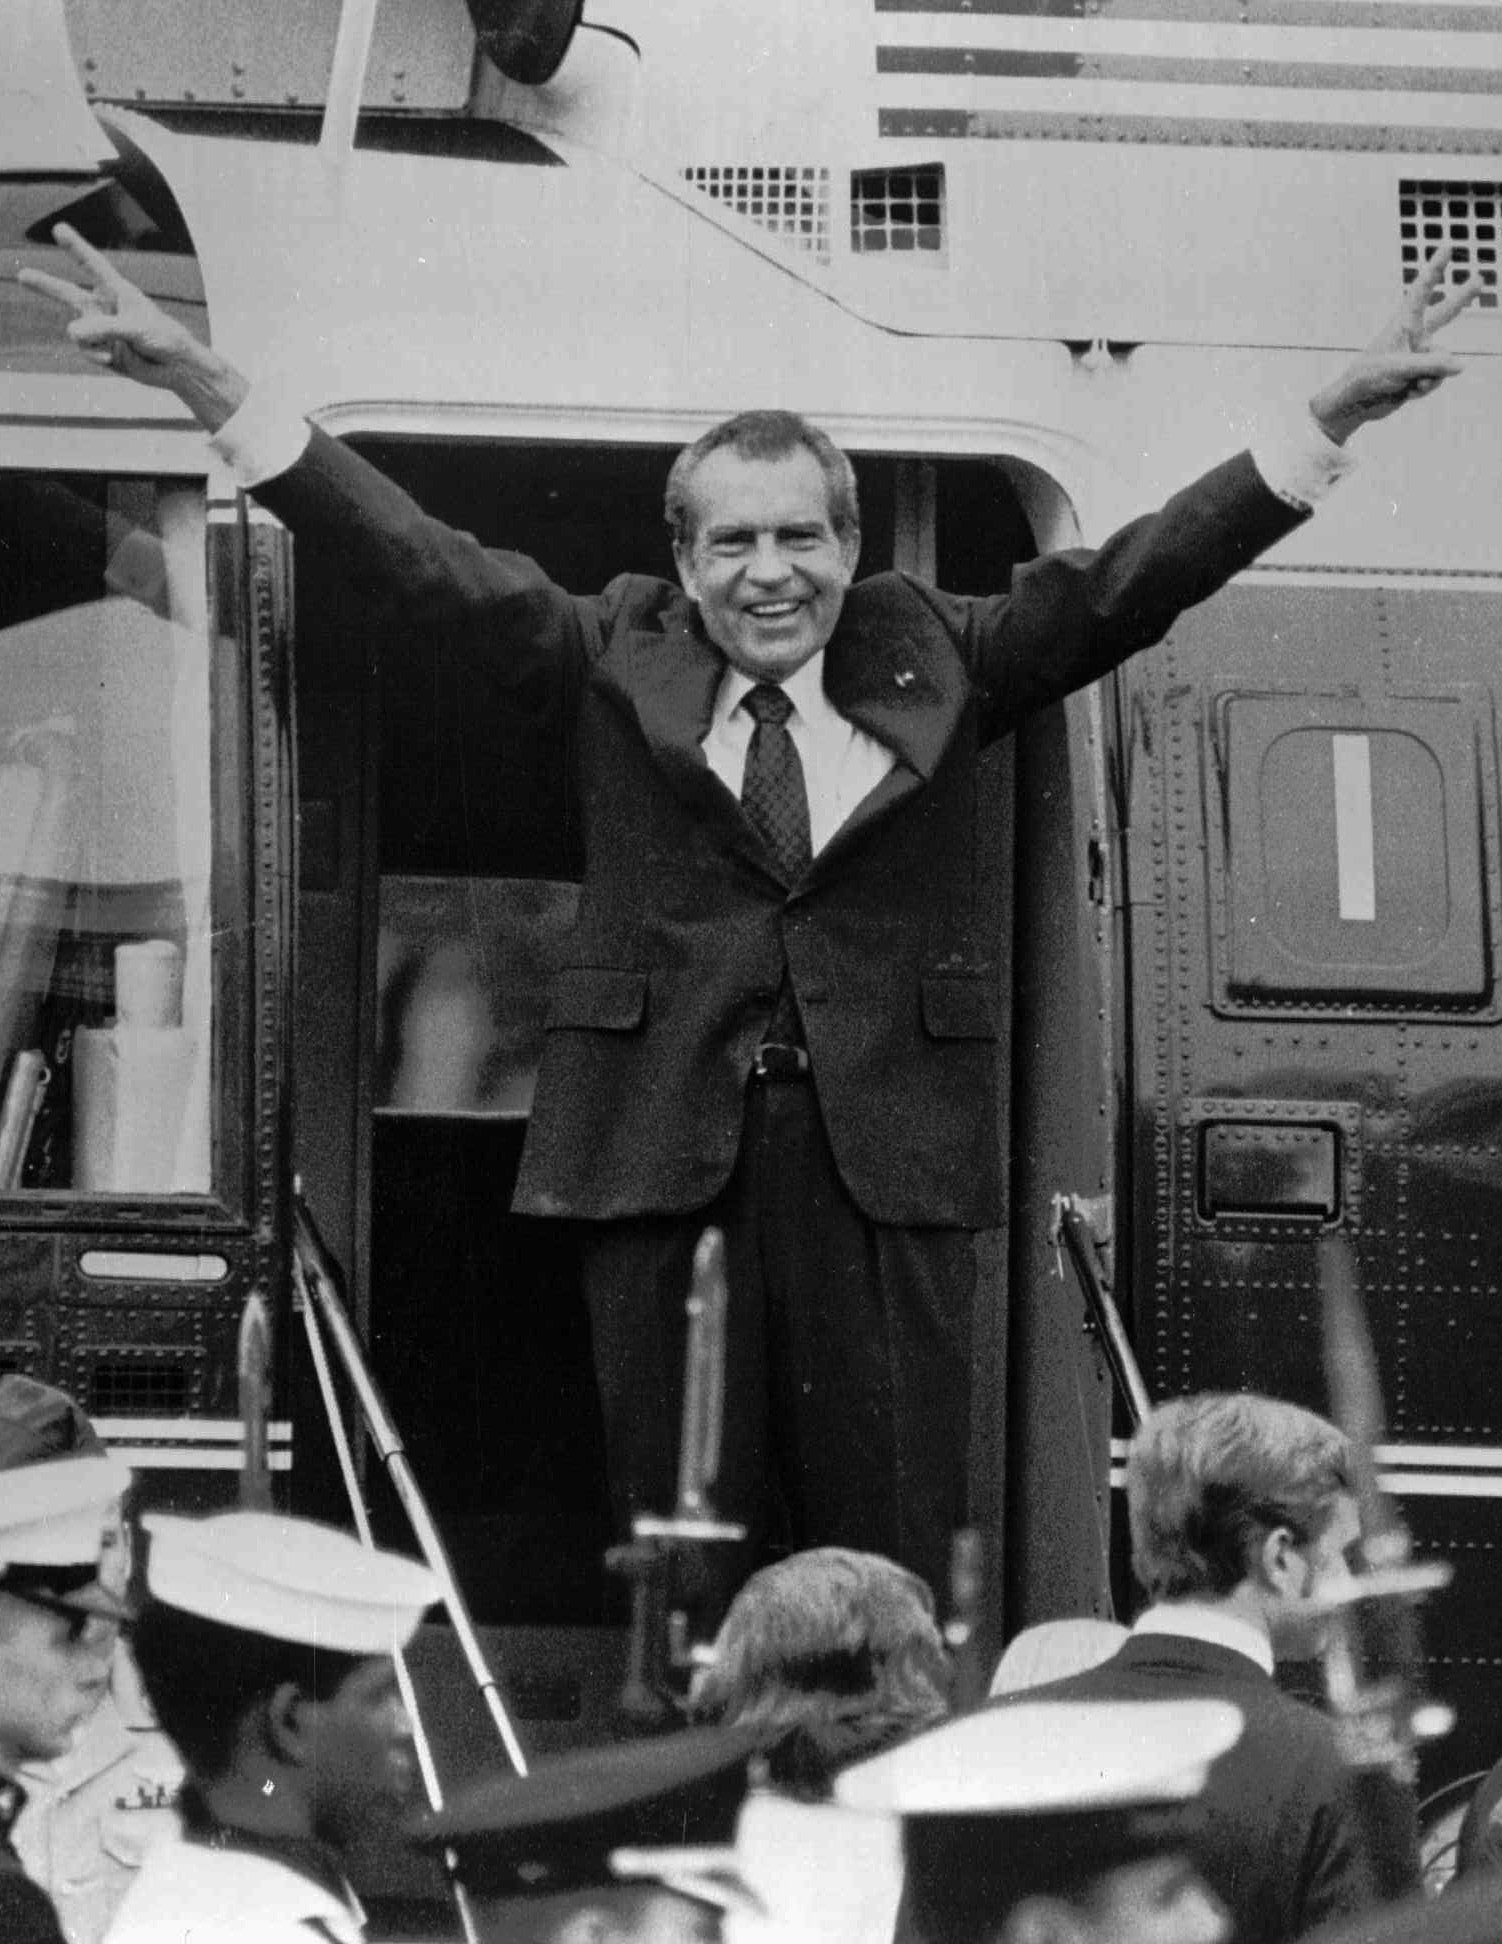 Richard Nixon leaves the White House after resigning.